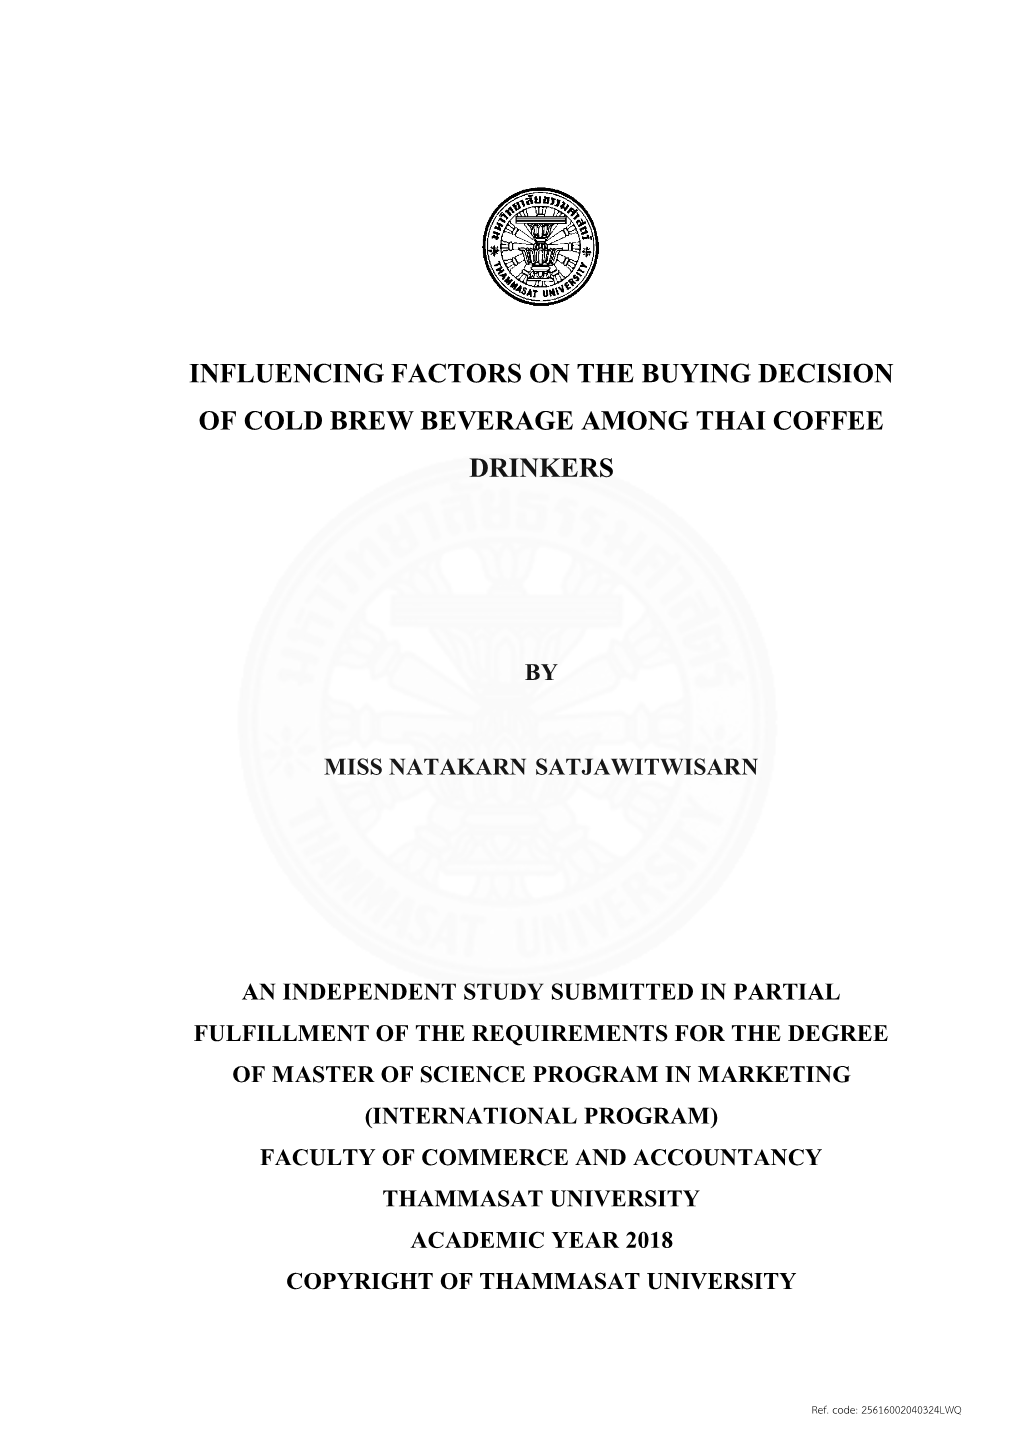 Influencing Factors on the Buying Decision of Cold Brew Beverage Among Thai Coffee Drinkers